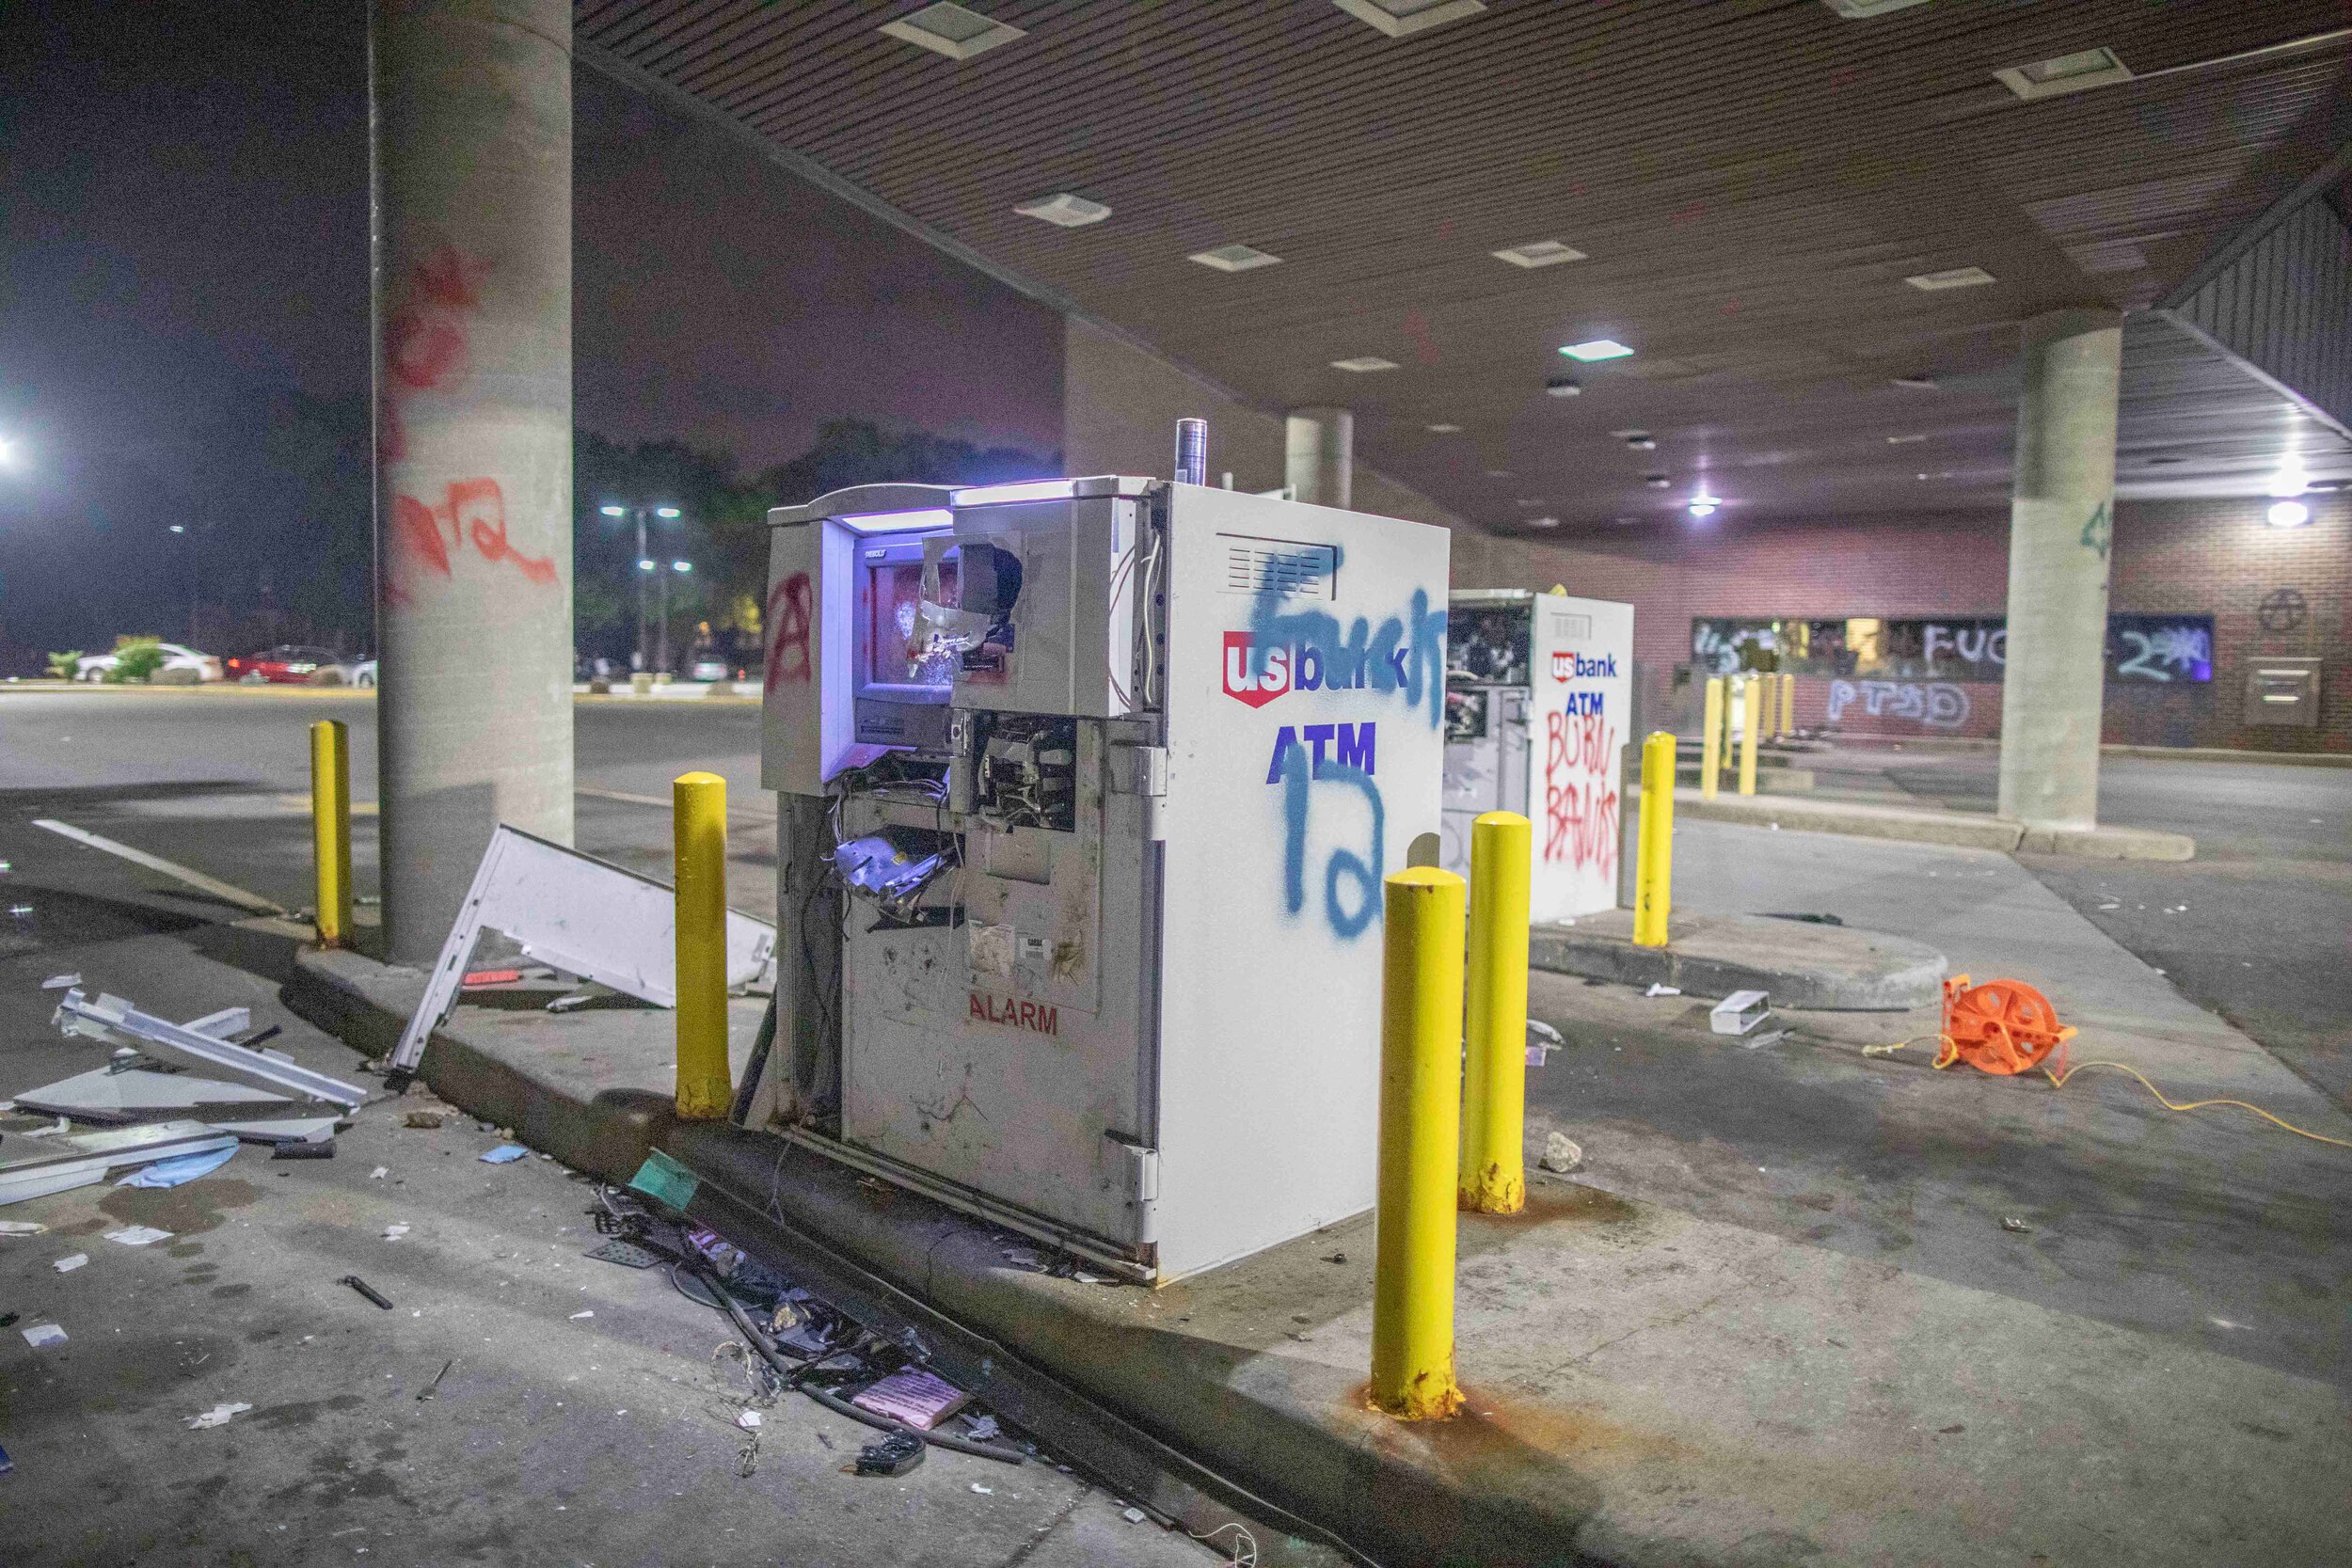  Drive thru ATM's sit torn apart at a US Bank drive thru location in Minneapolis, Minnesota after looters broke open the machines during a riot over the police killing of George Floyd. The windows into the bank were shattered as well as the the drive